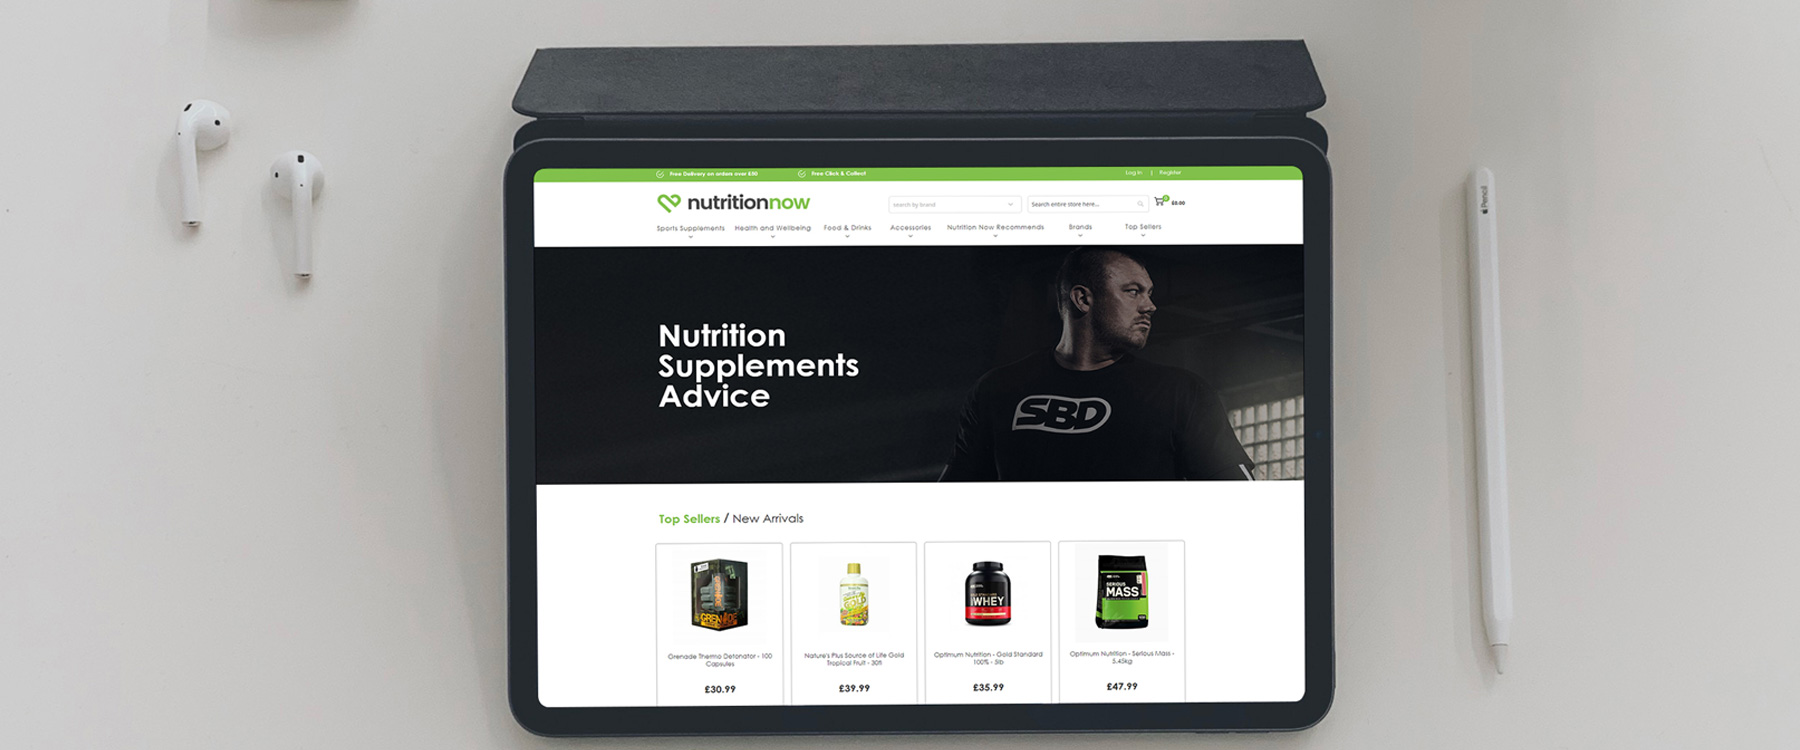 New eCommerce Website for online discount supplement store, Nutrition Now Image